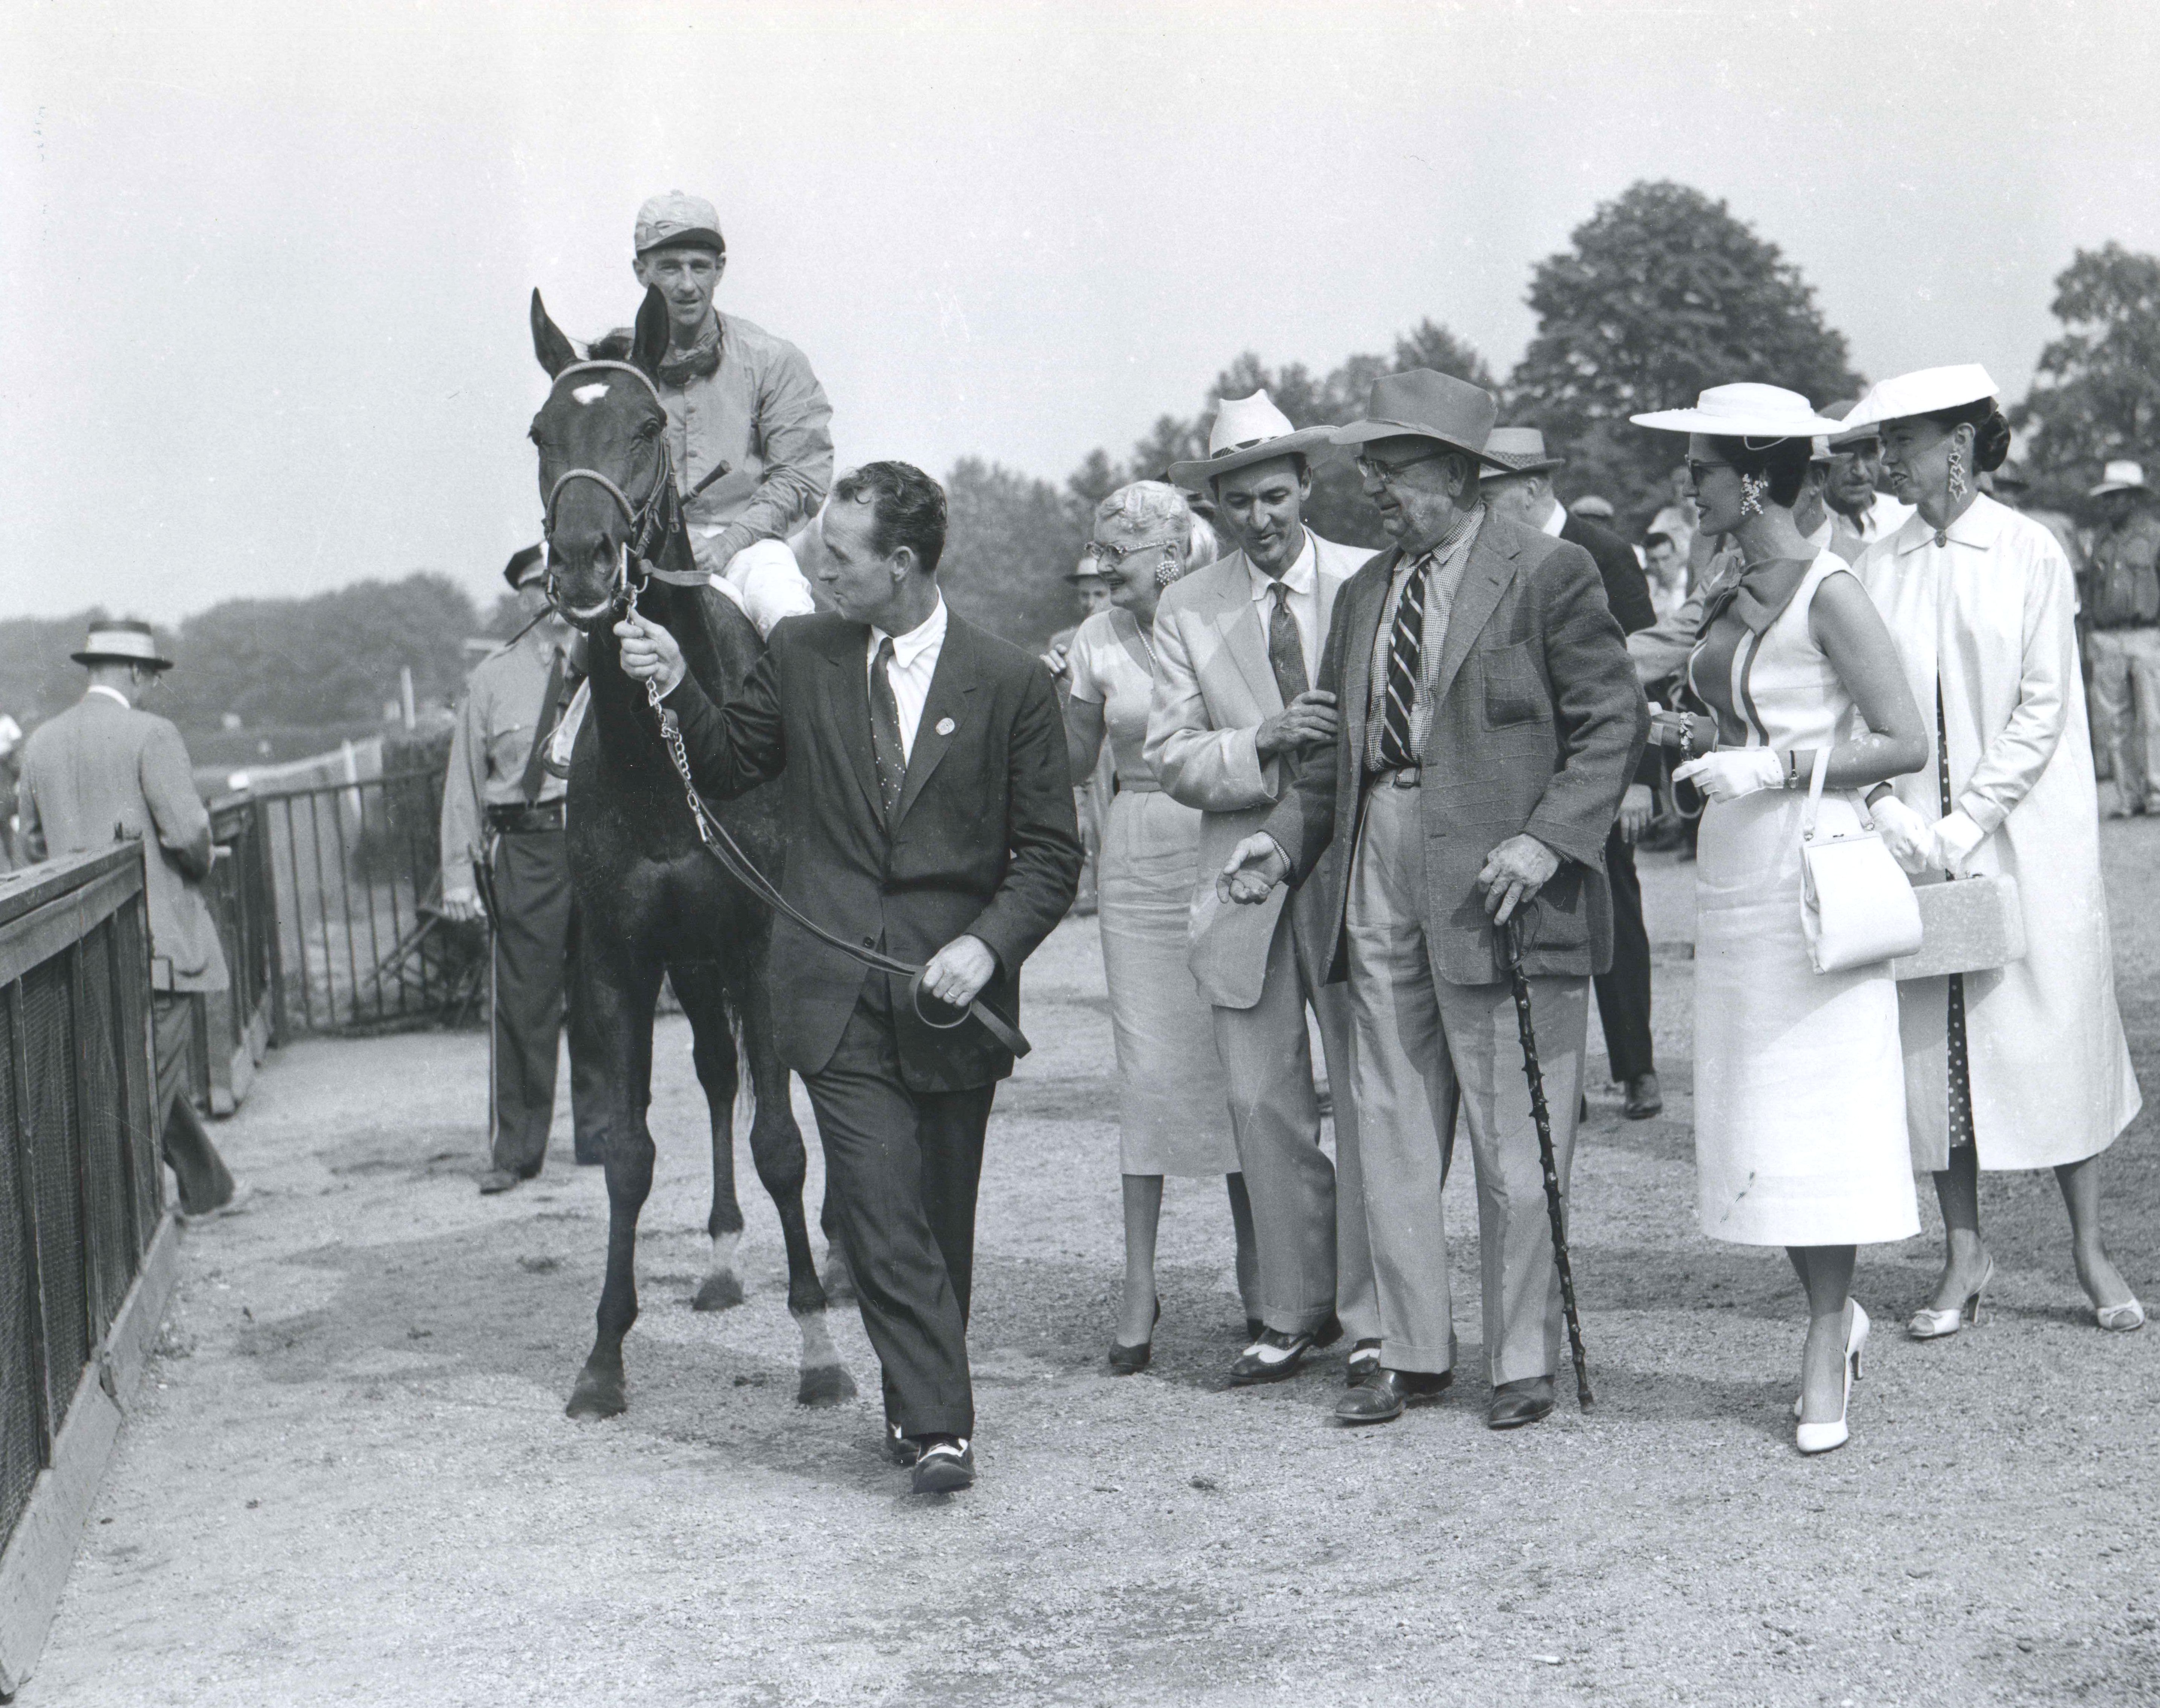 Needles (Dave Erb up) on his way to the winner's circle after winning the 1956 Belmont Stakes (Keeneland Library Morgan Collection/Museum Collection)